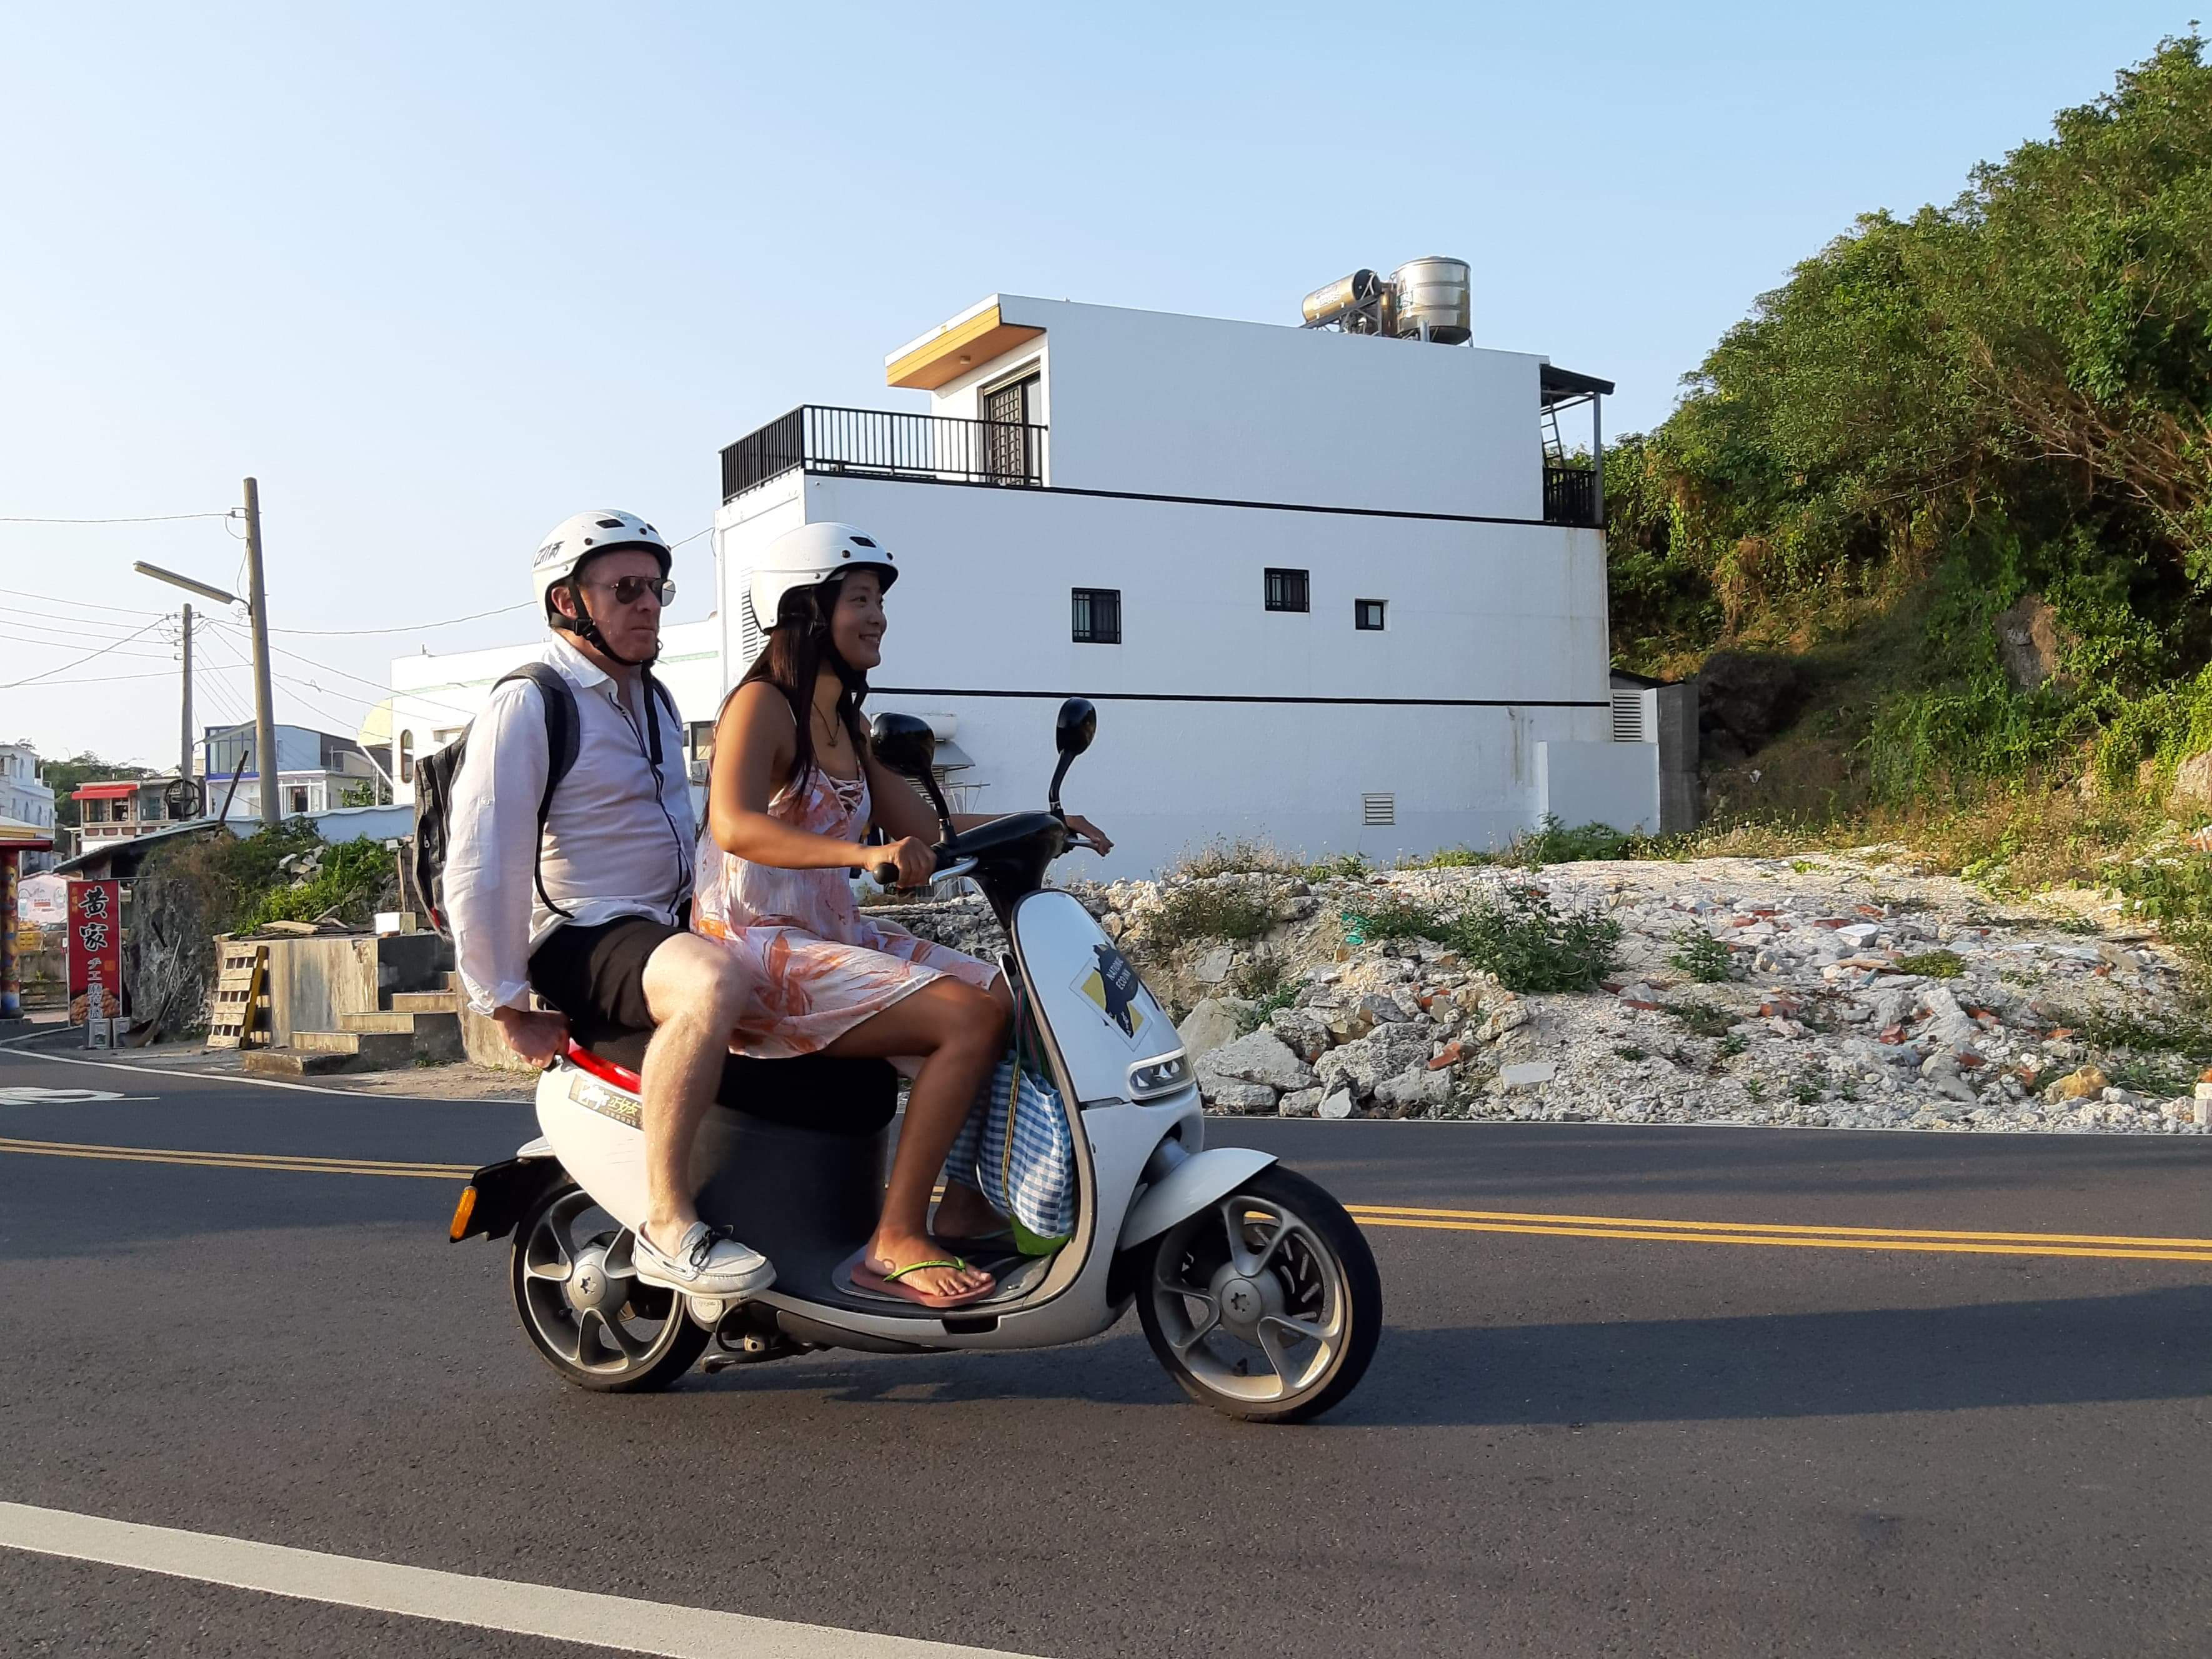 Lynn Mo offered an e-scooter ride to Jérôme Pitorin around the island. (Photo courtesy: Lynn Mo)